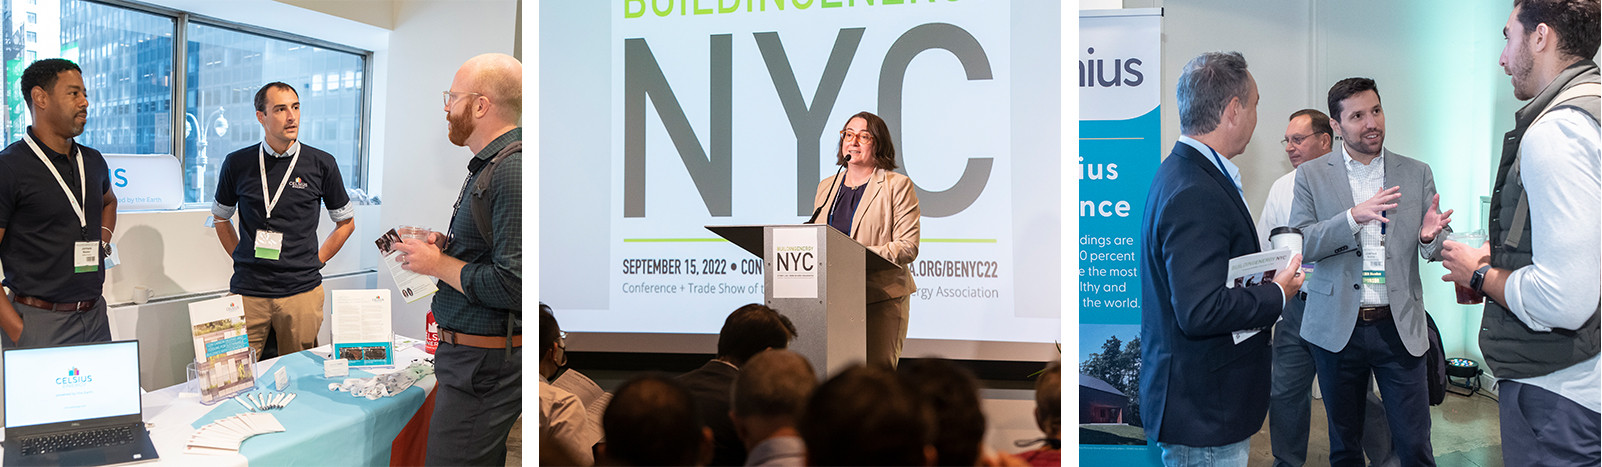 three images from the BuildingEnergy NYC conference